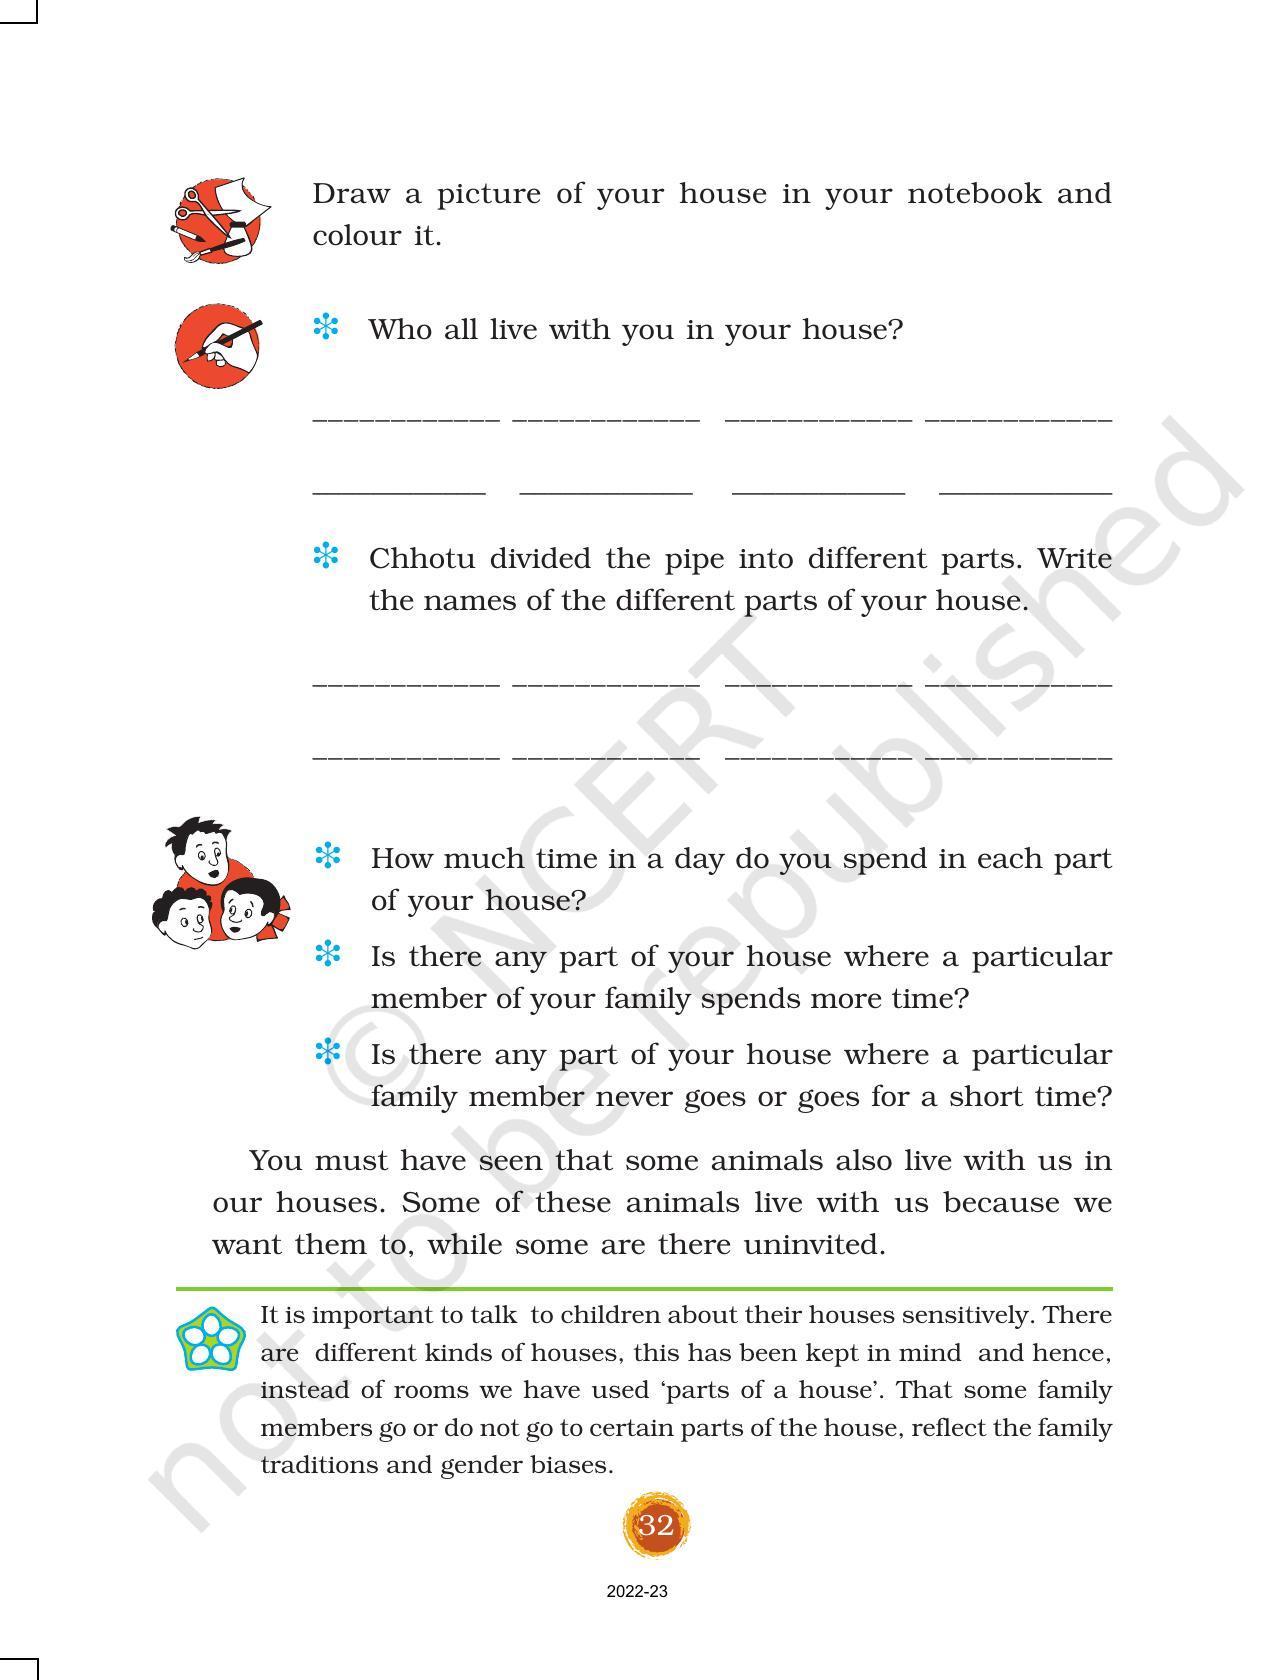 NCERT Book for Class 3 EVS Chapter 5-Chhotu’s House - Page 3